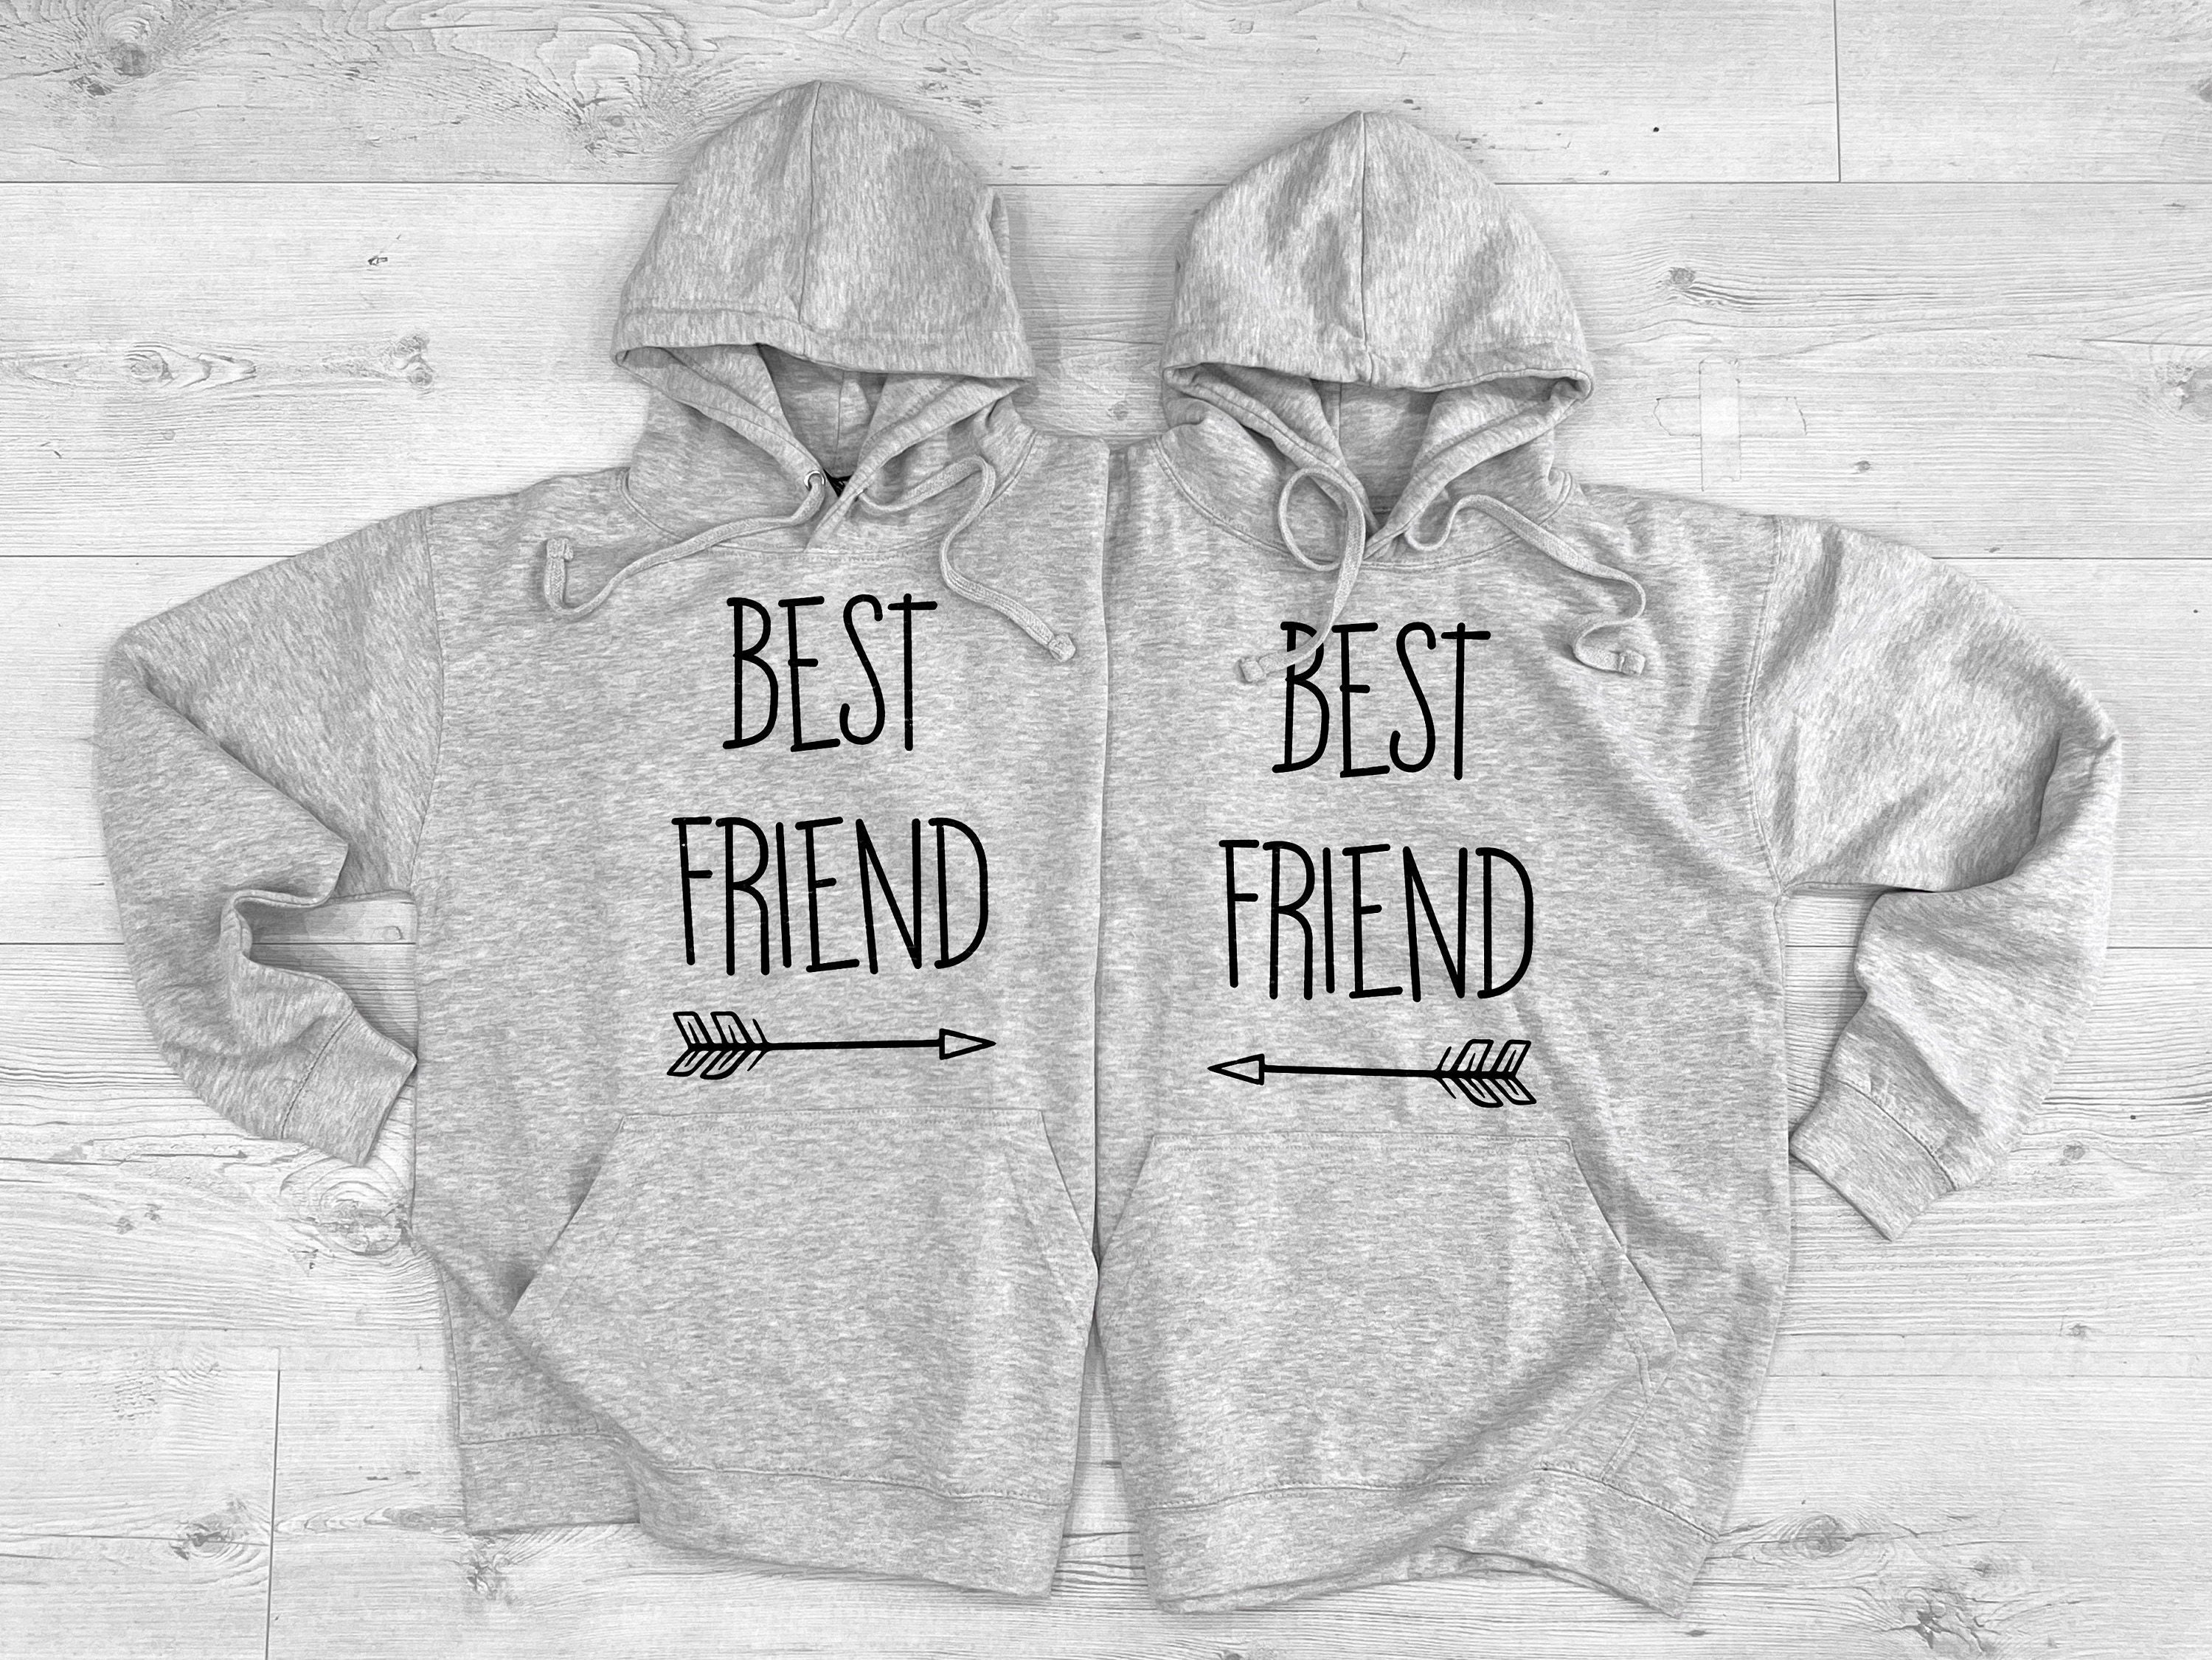 Buy Matching Best Friends Hoodies Matching Friend Hoodies Matching Hoodies  for Best Friend Hoodie Gift Set of 2 Twin Pack Online in India 